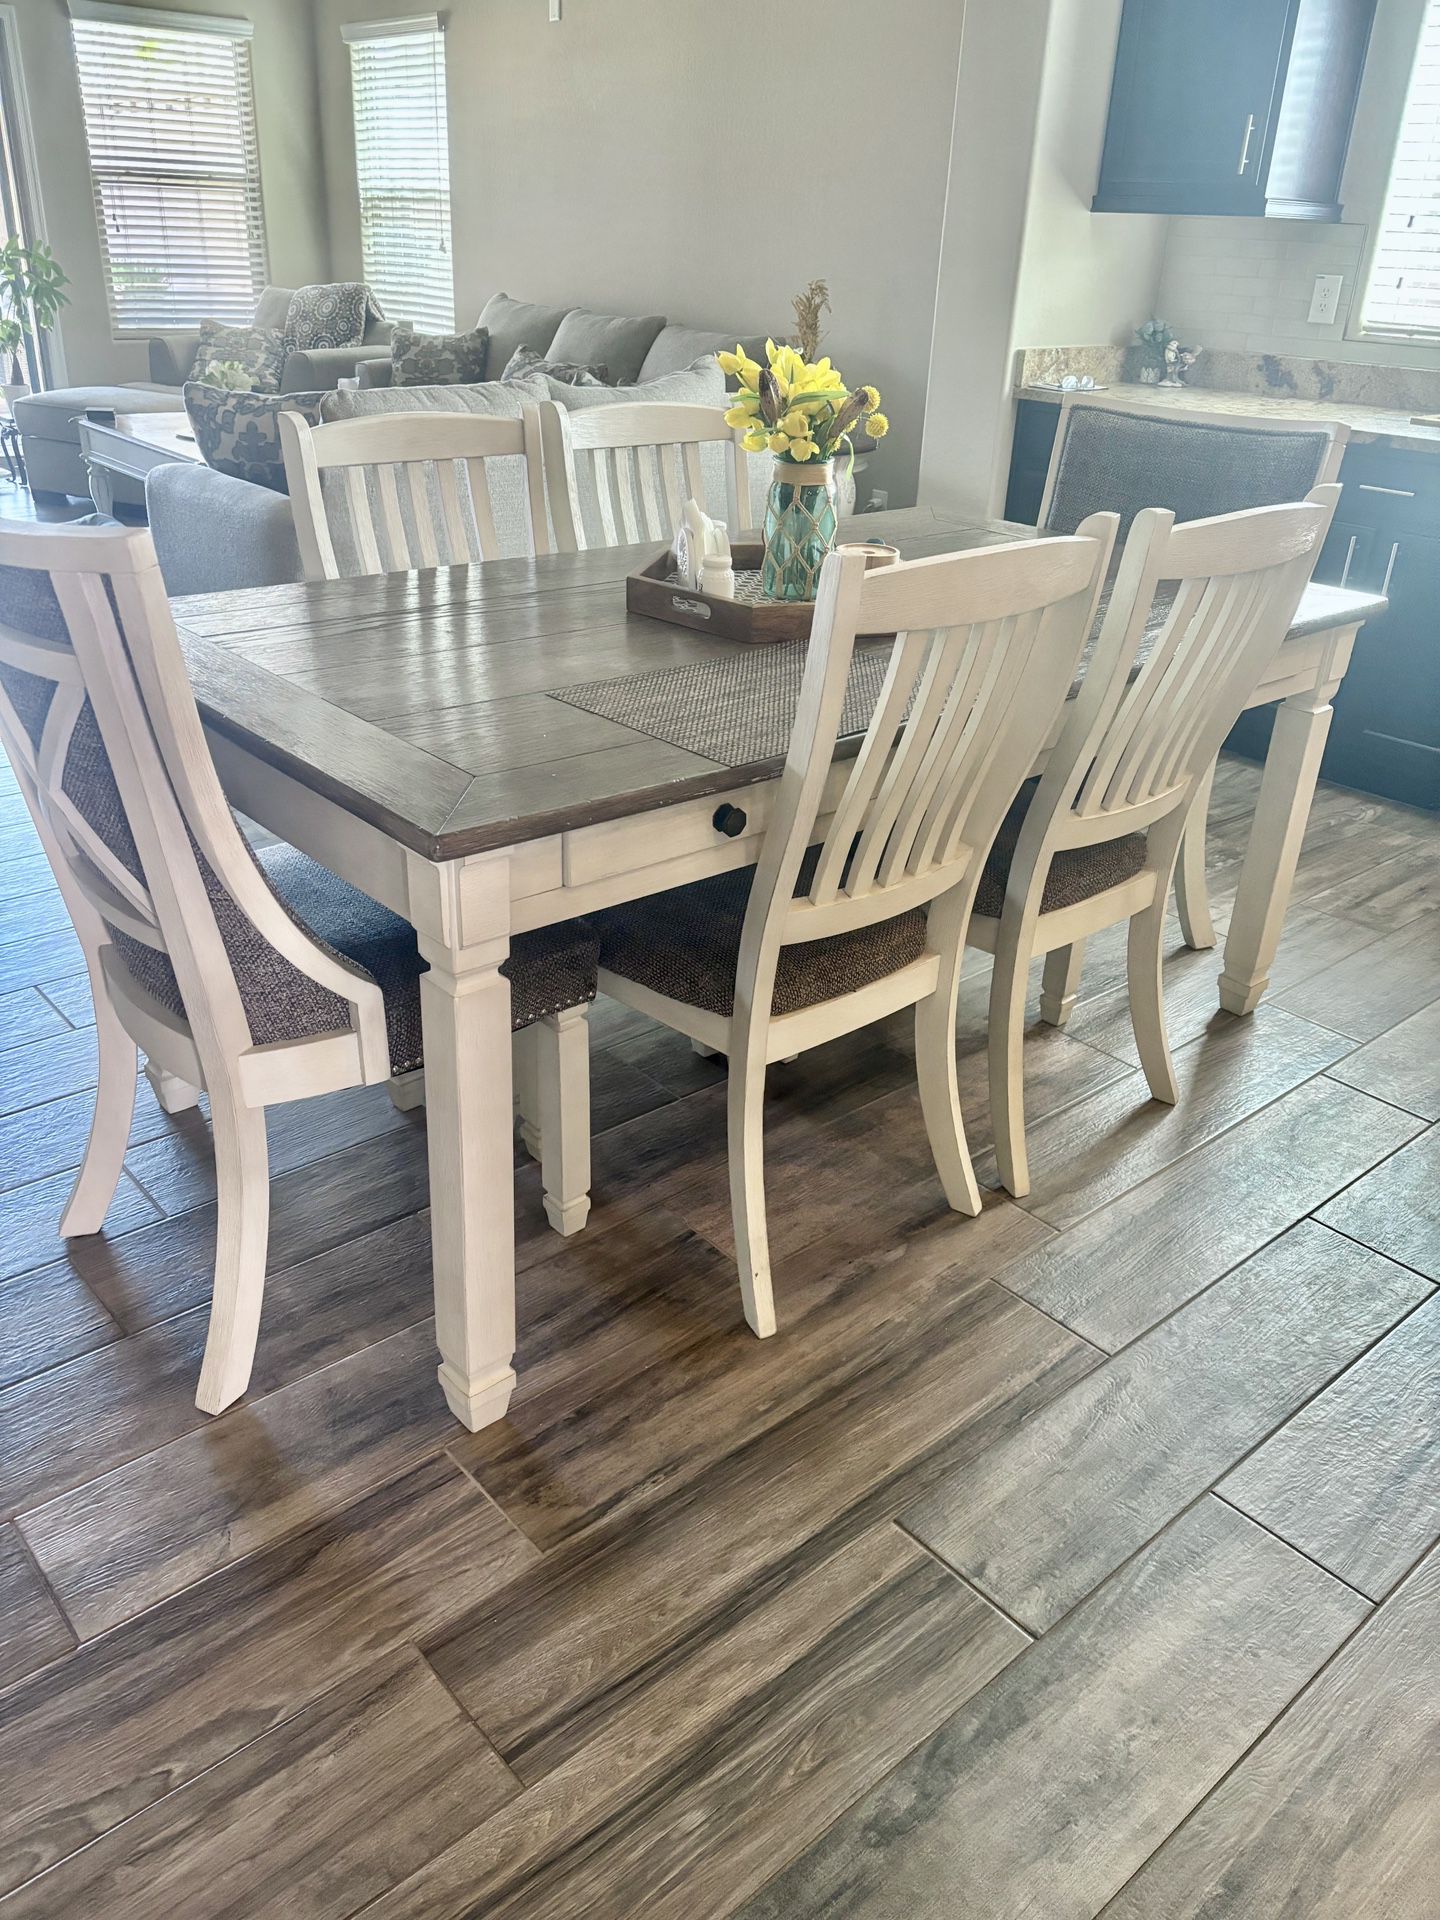 6 Chair Dining Table